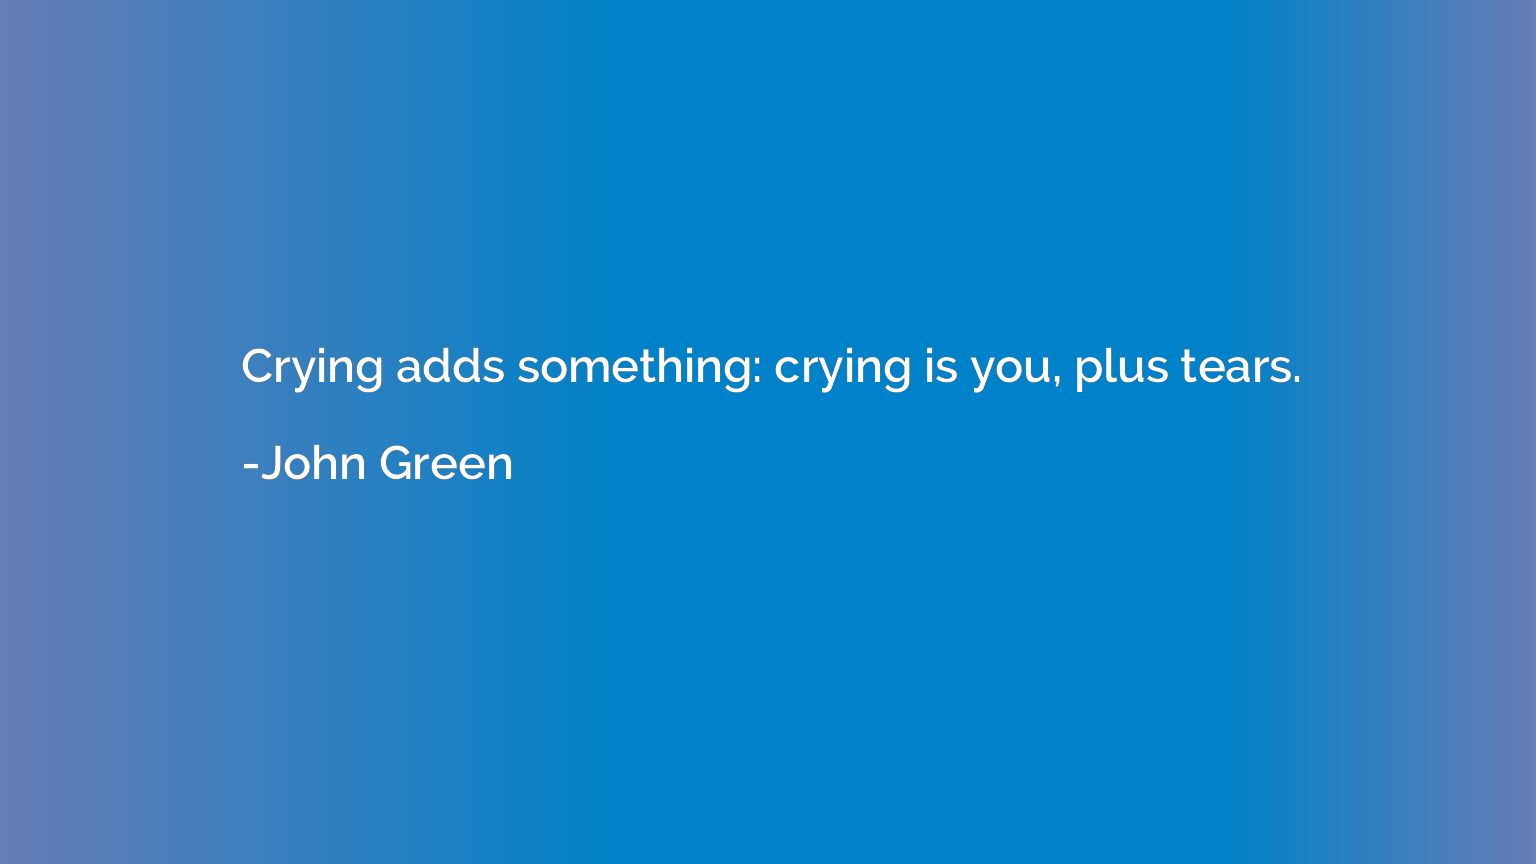 Crying adds something: crying is you, plus tears.